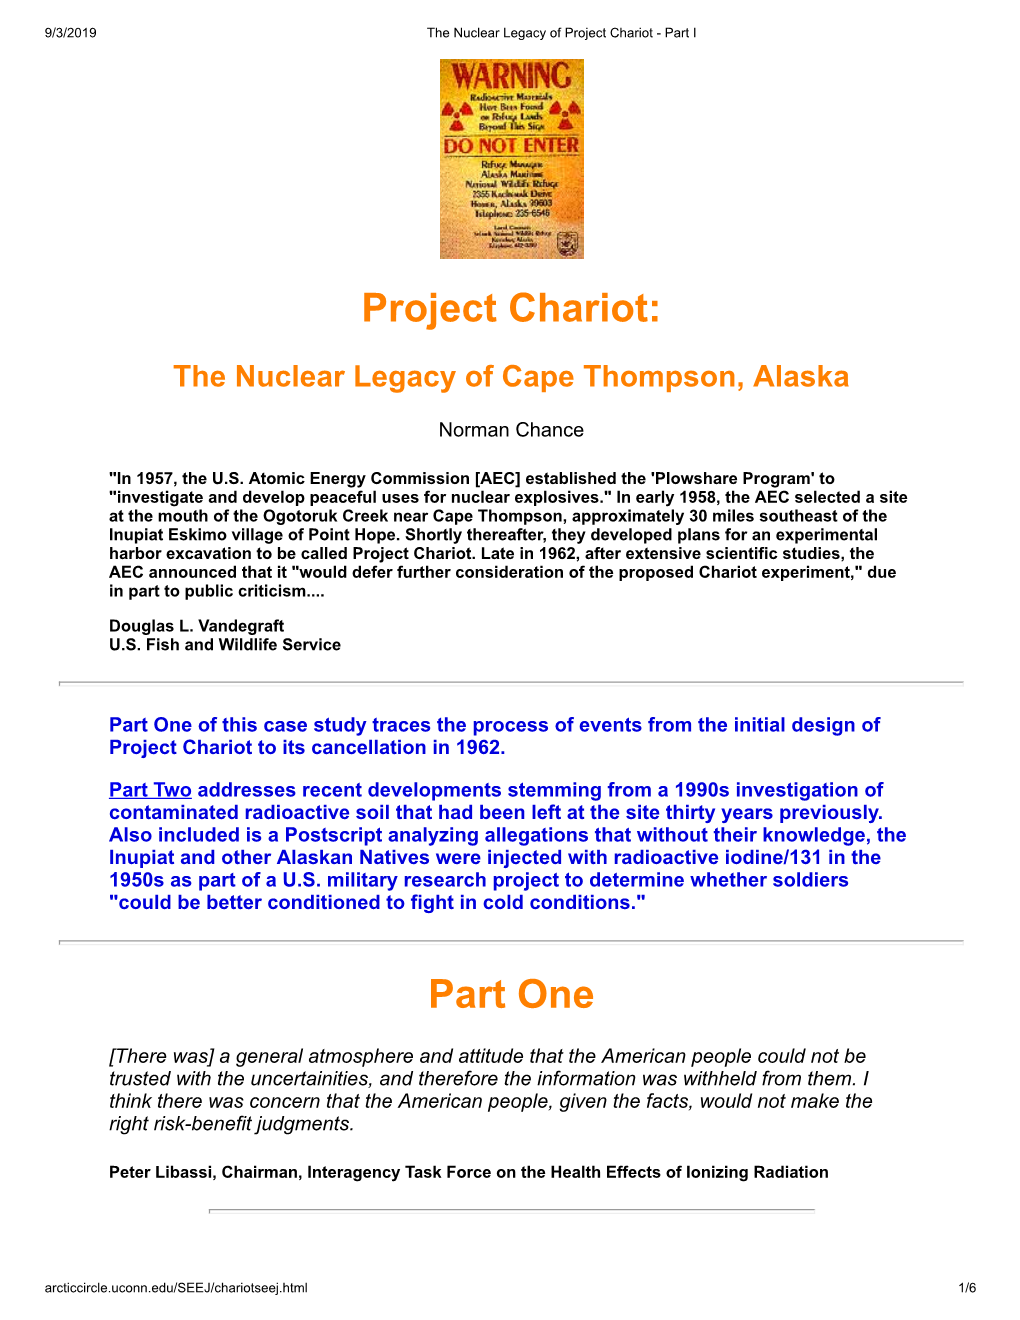 Project Chariot: Part